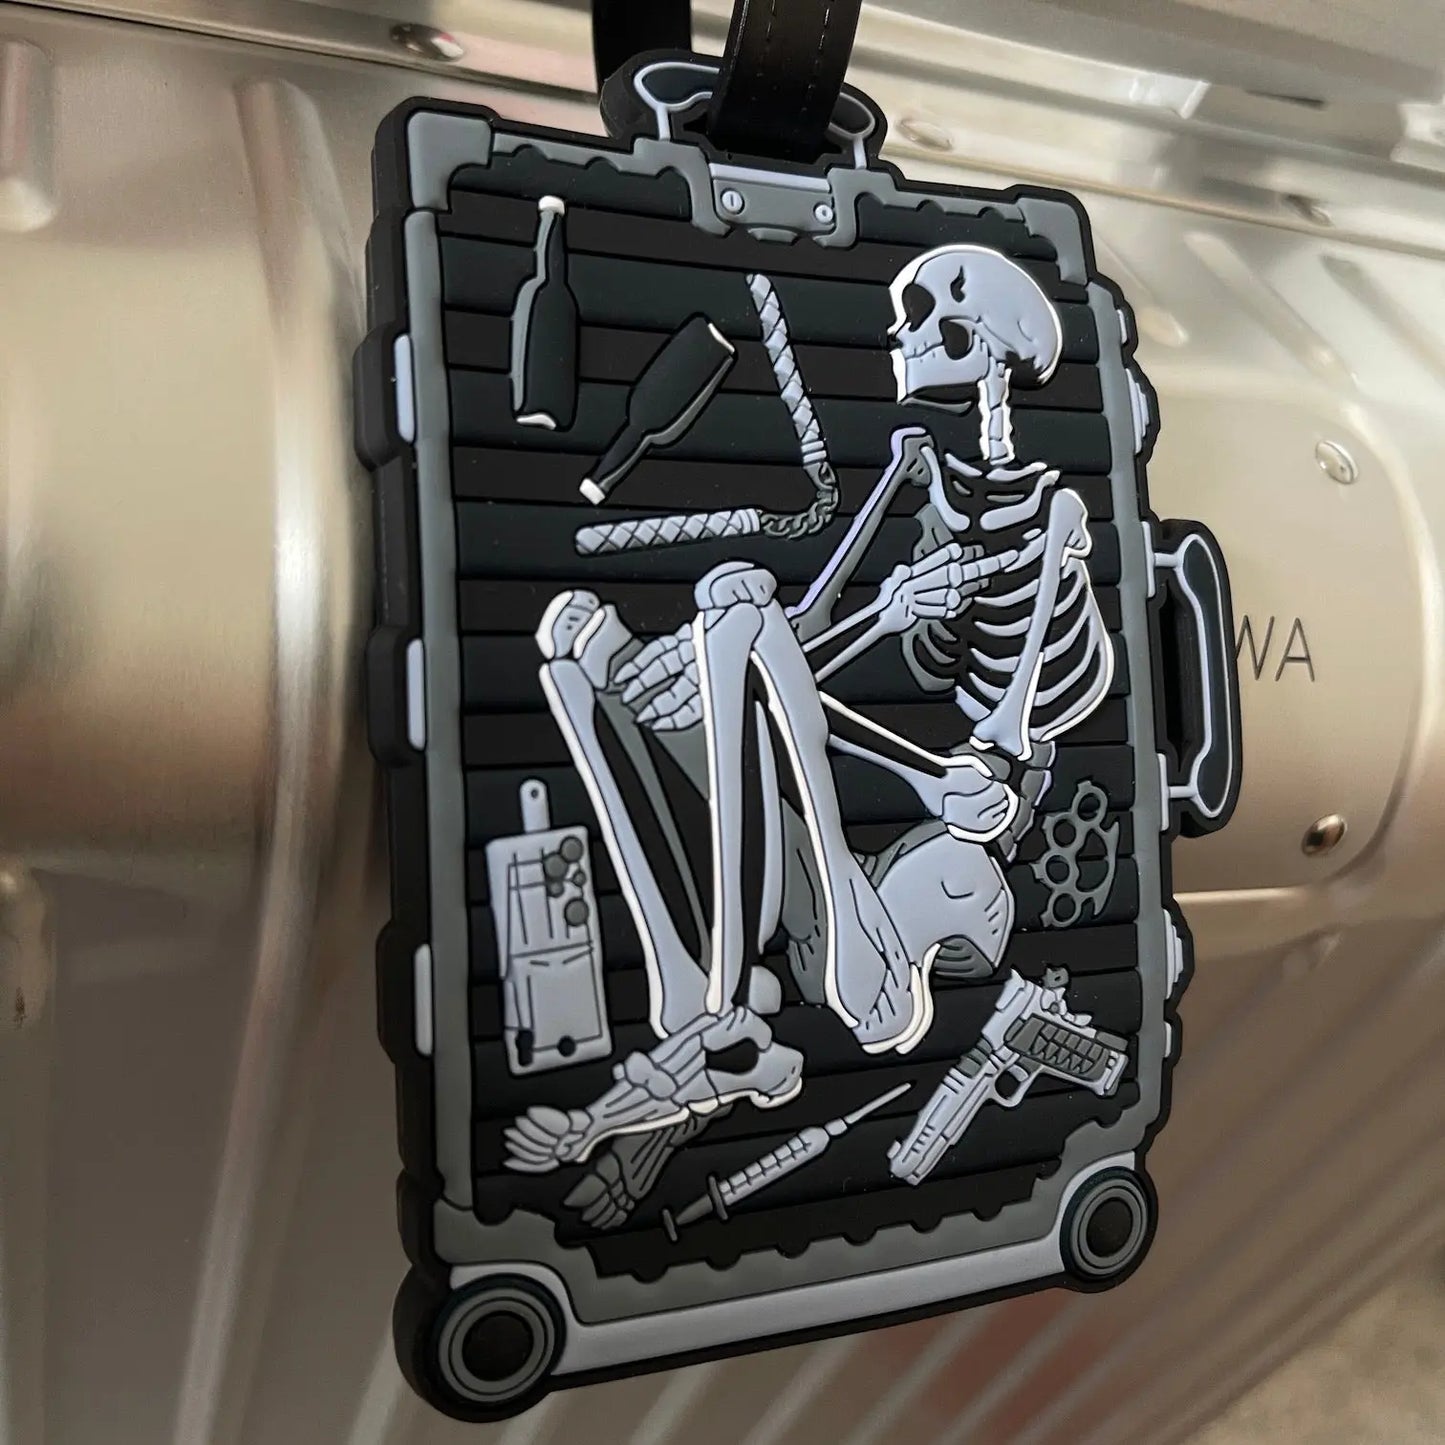 Luggage Tag #1 X-RAY PATCHLAB